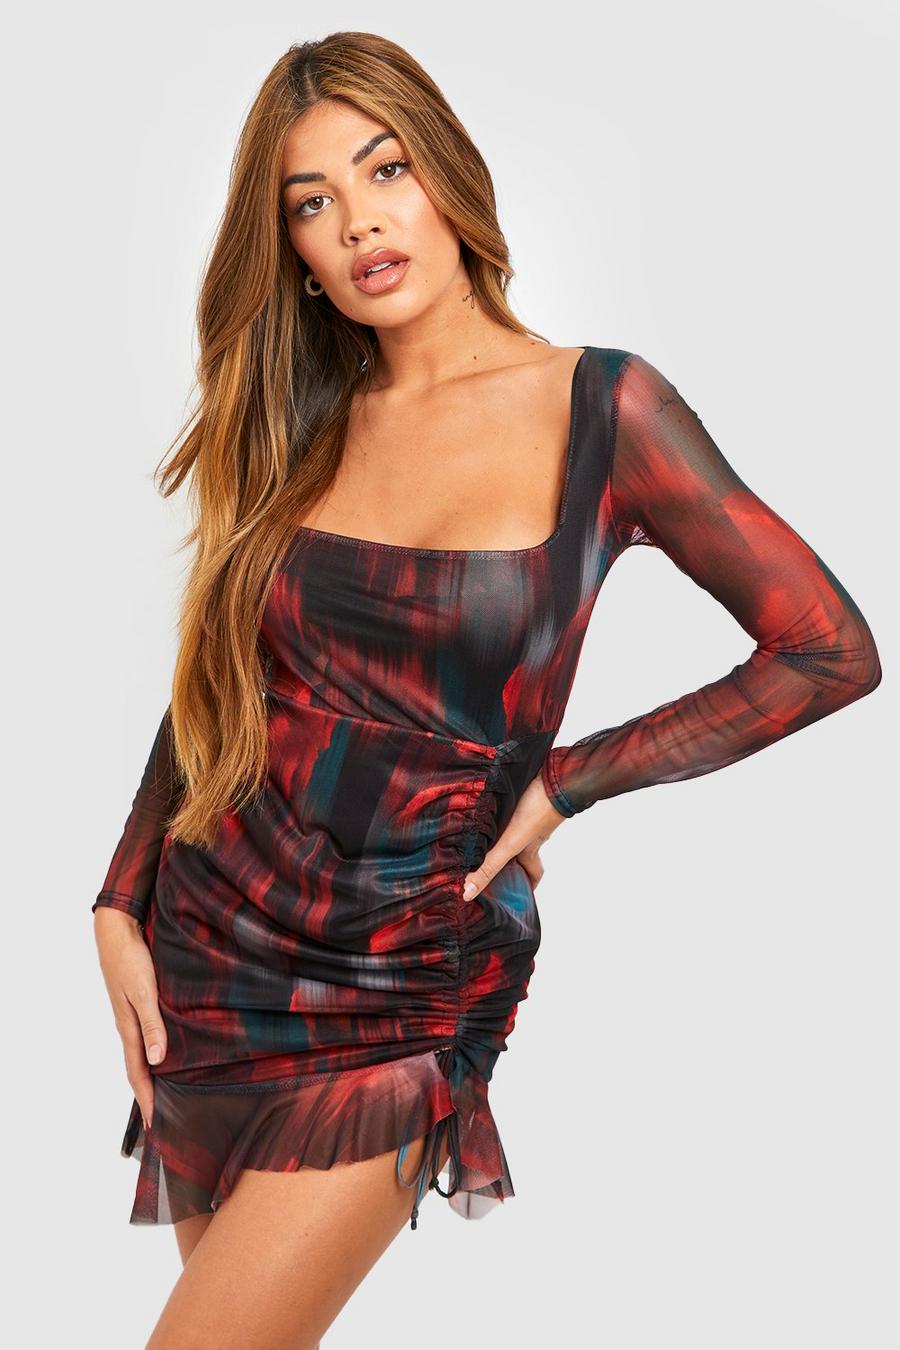 Floral Ruched Dress  Classy outfits, Red and black outfits, Event